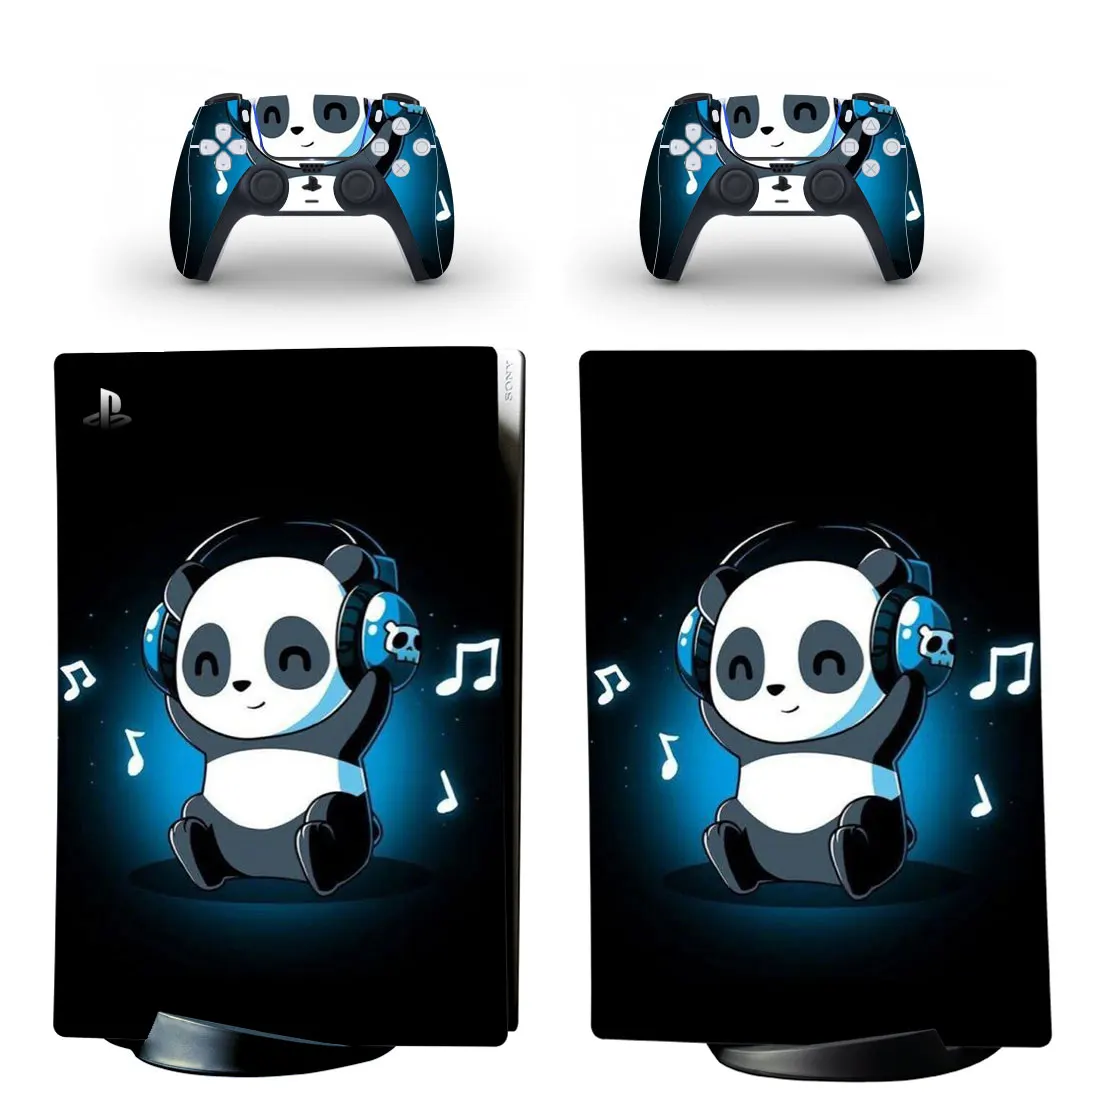 

Panda PS5 Digital Skin Sticker for Playstation 5 Console & 2 Controllers Decal Vinyl Protective Skins